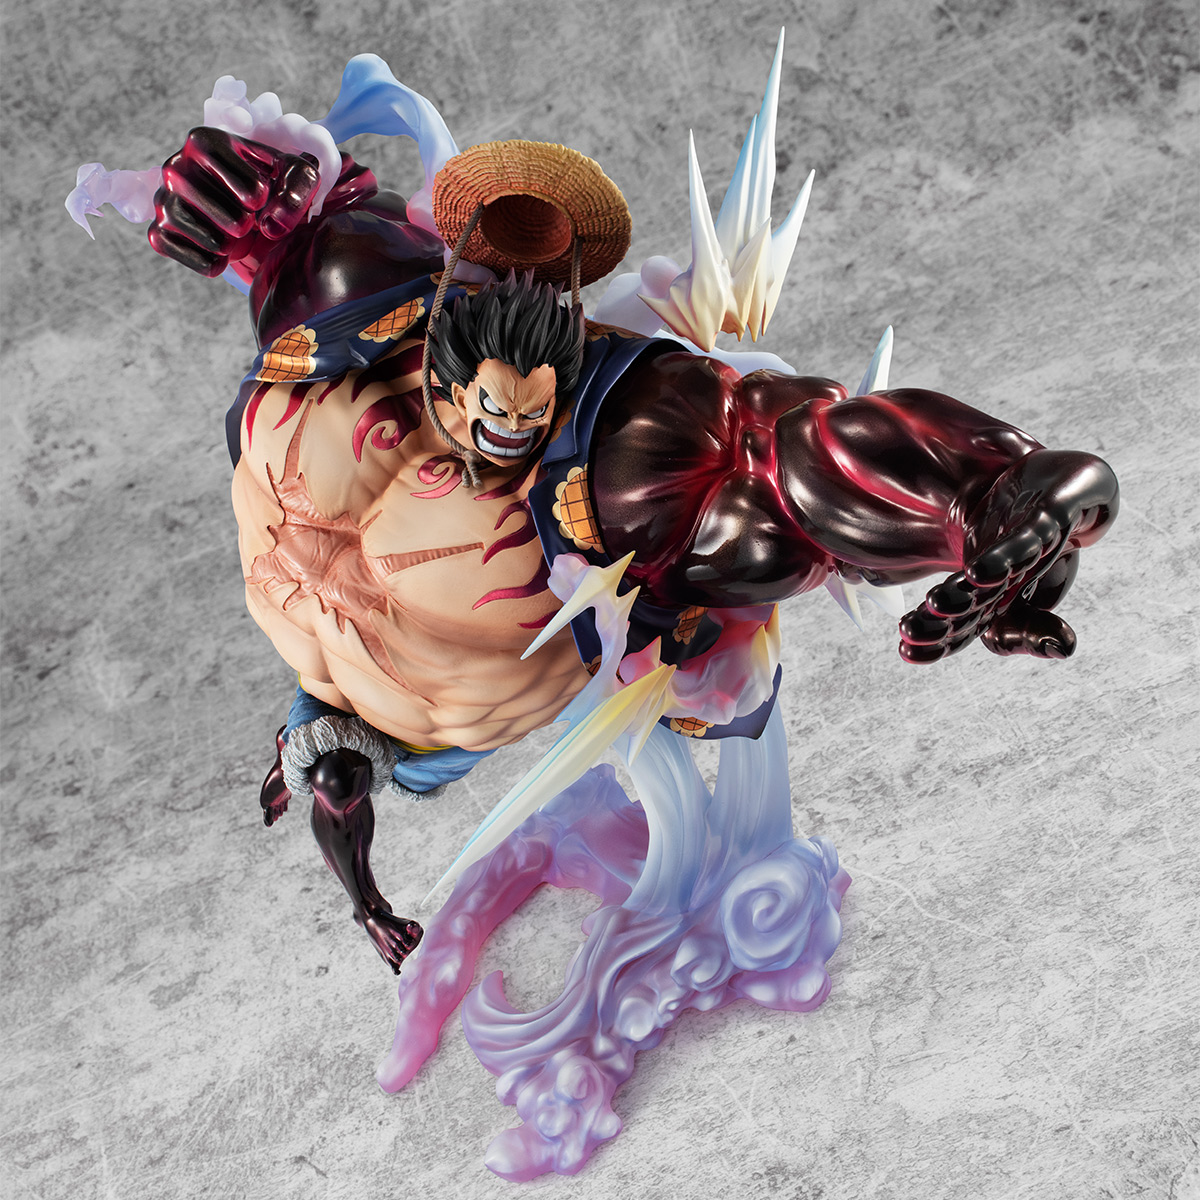 How To Make GEAR 4 LUFFY BOUNCE MAN (Boundman) FROM ONE PIECE IN